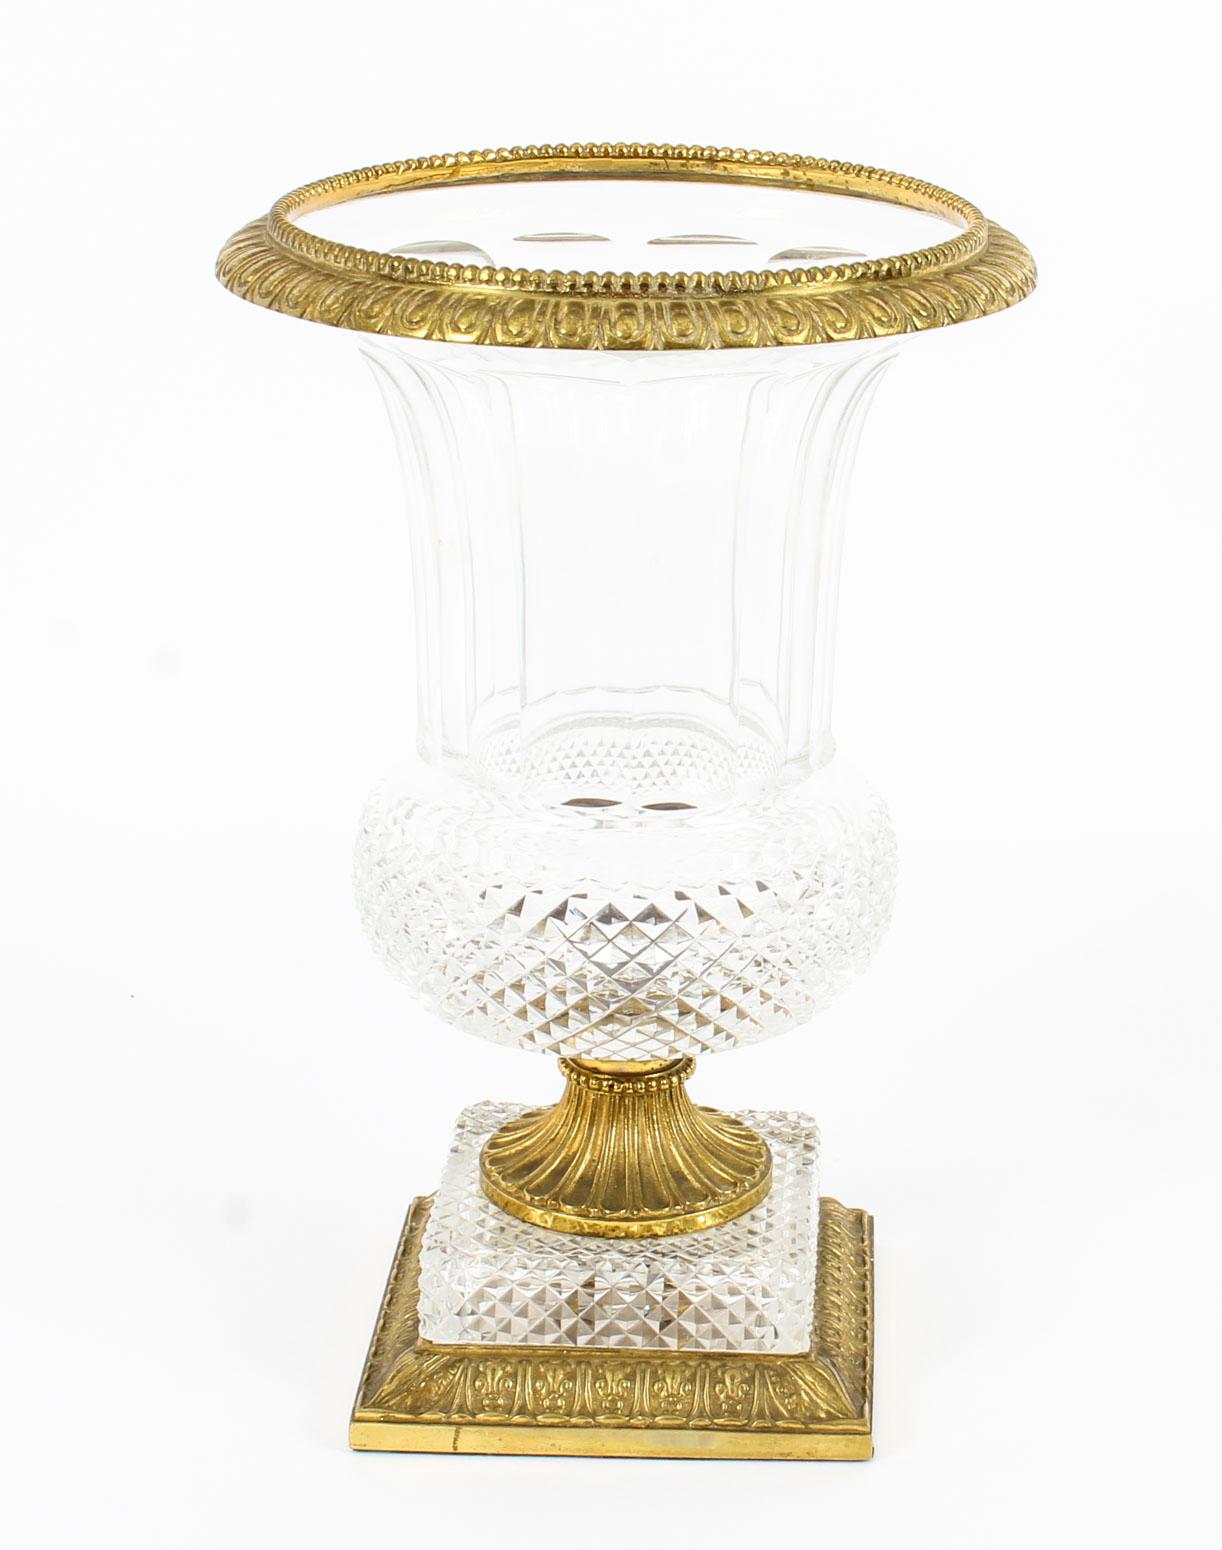 A large superb quality antique French cut crystal glass and ormolu Borghese Campana vase, circa 1890 in date. 

The bell-shaped krater and square base features a diamond and ribbed cut glass design with a scalloped ormolu mouth and fillet and